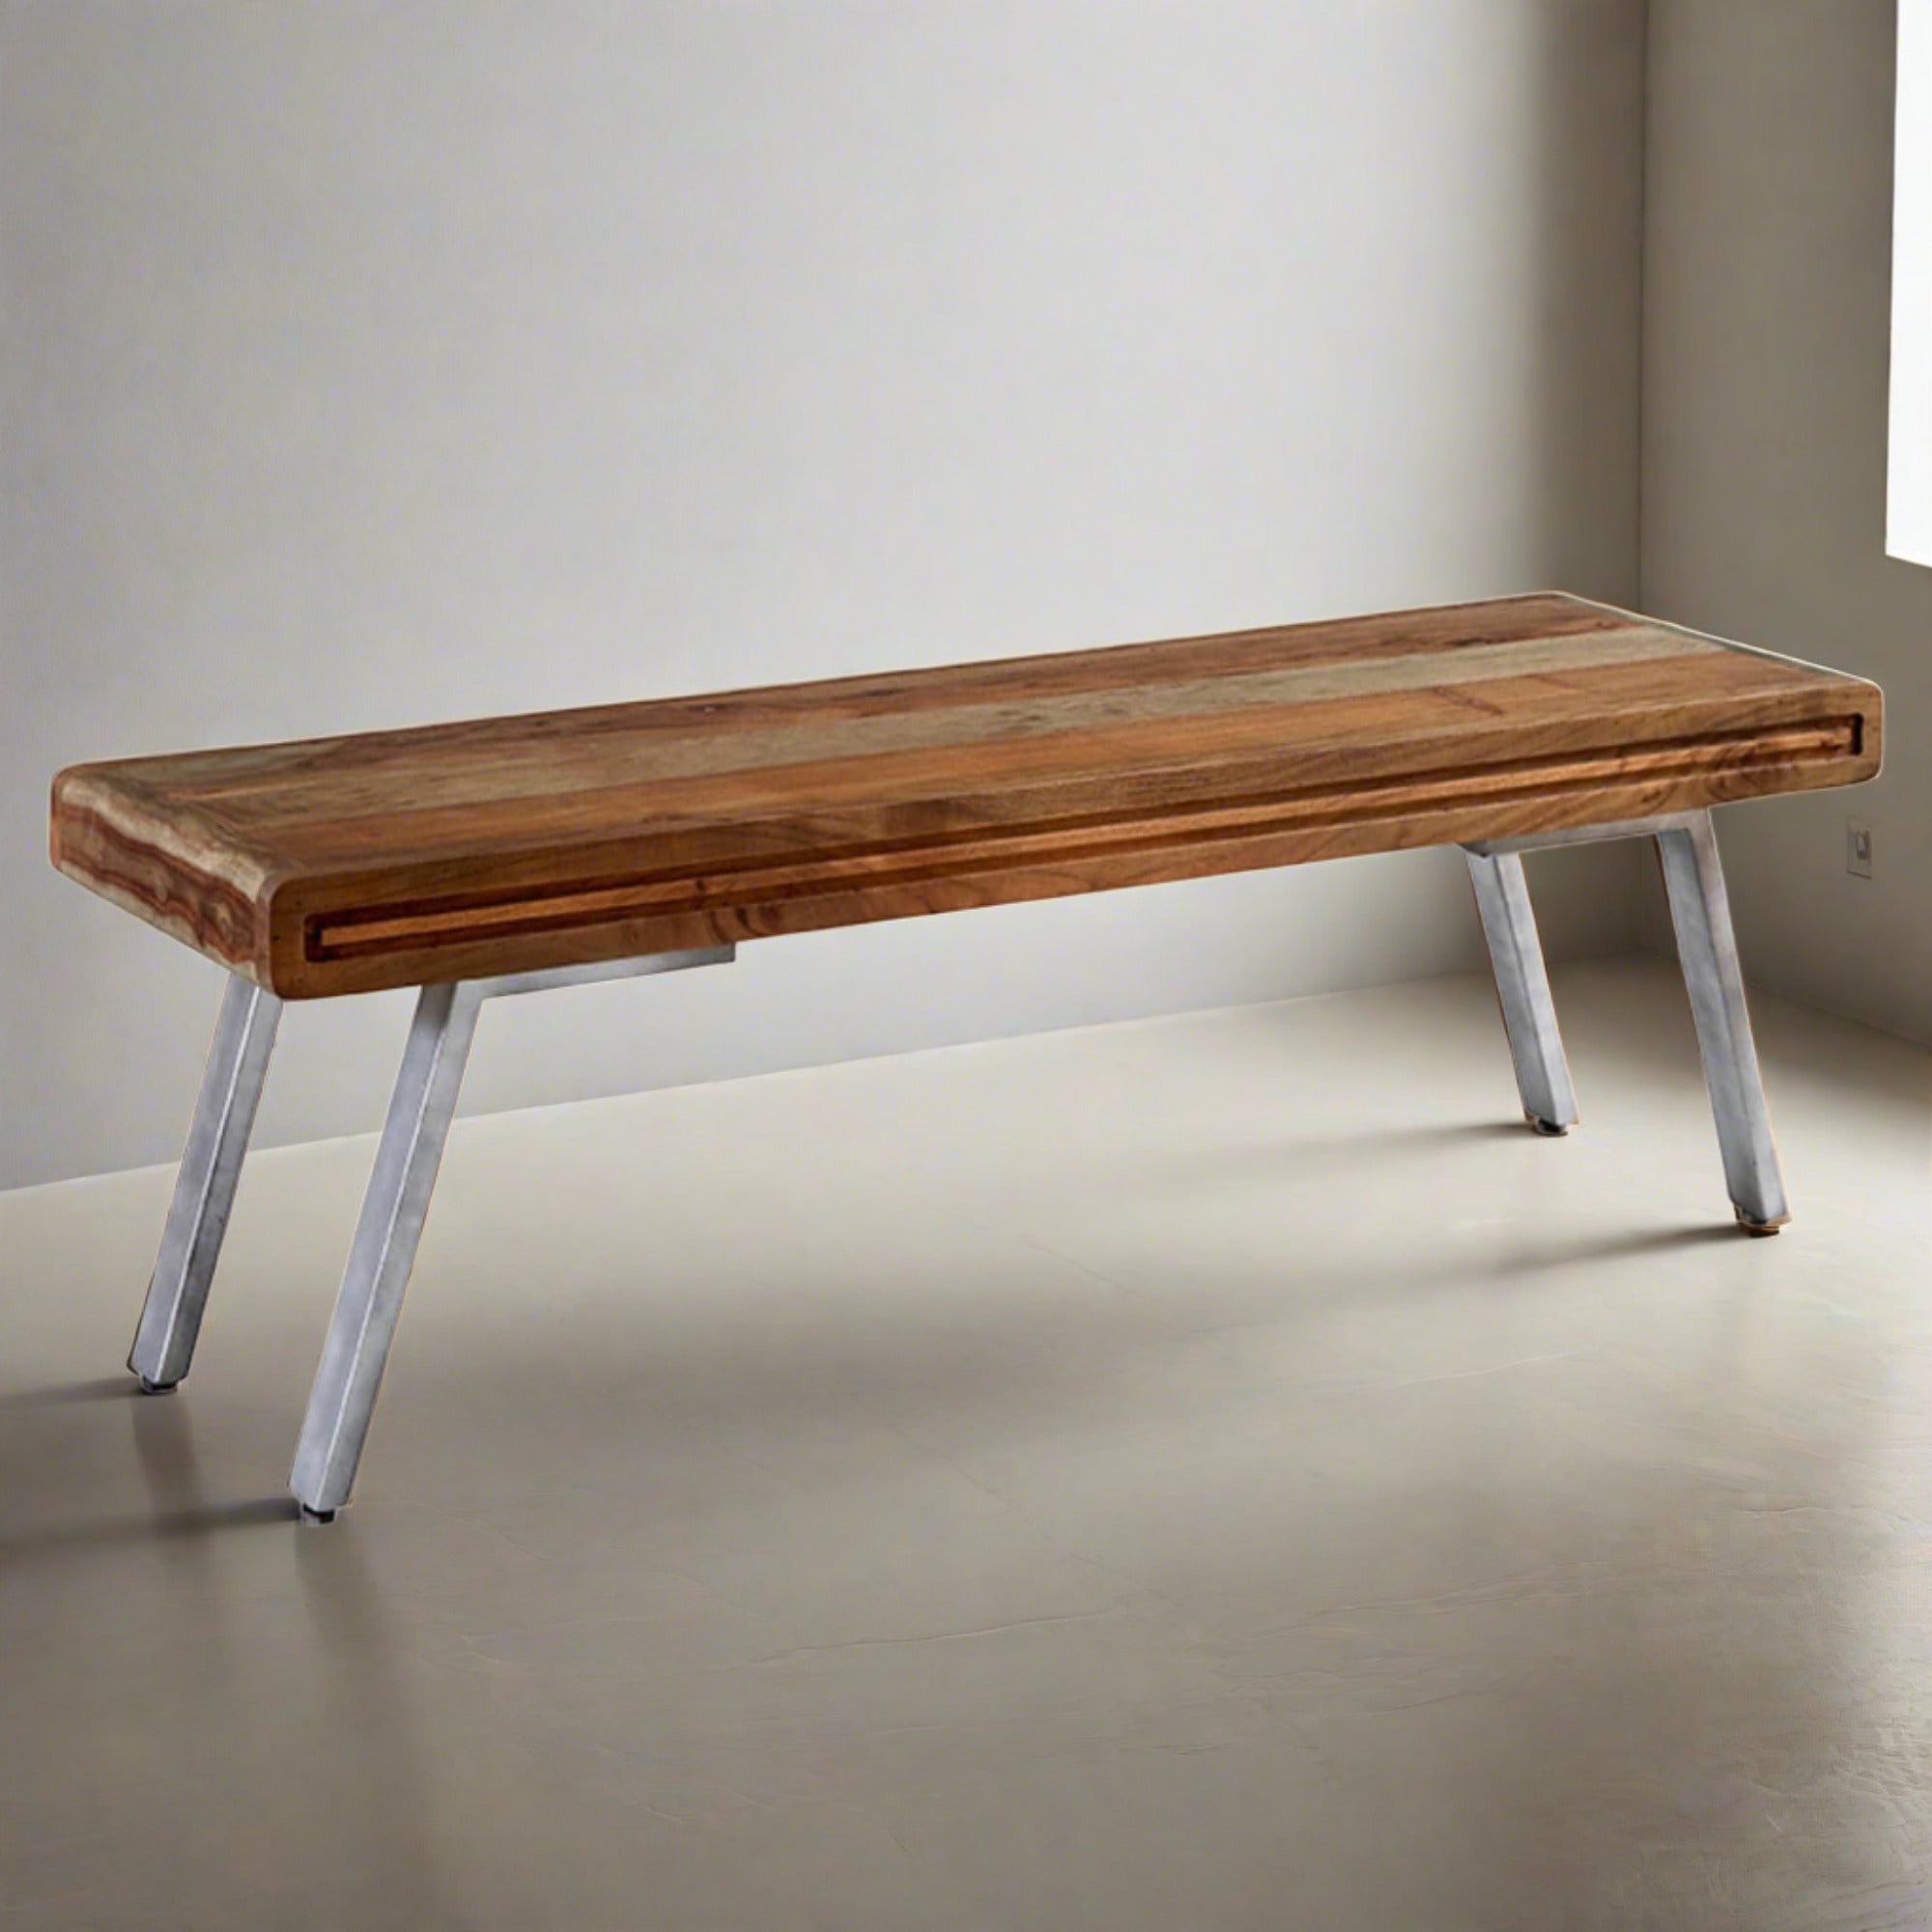 Kasia dining bench in acacia wood with metal legs | malletandplane.com